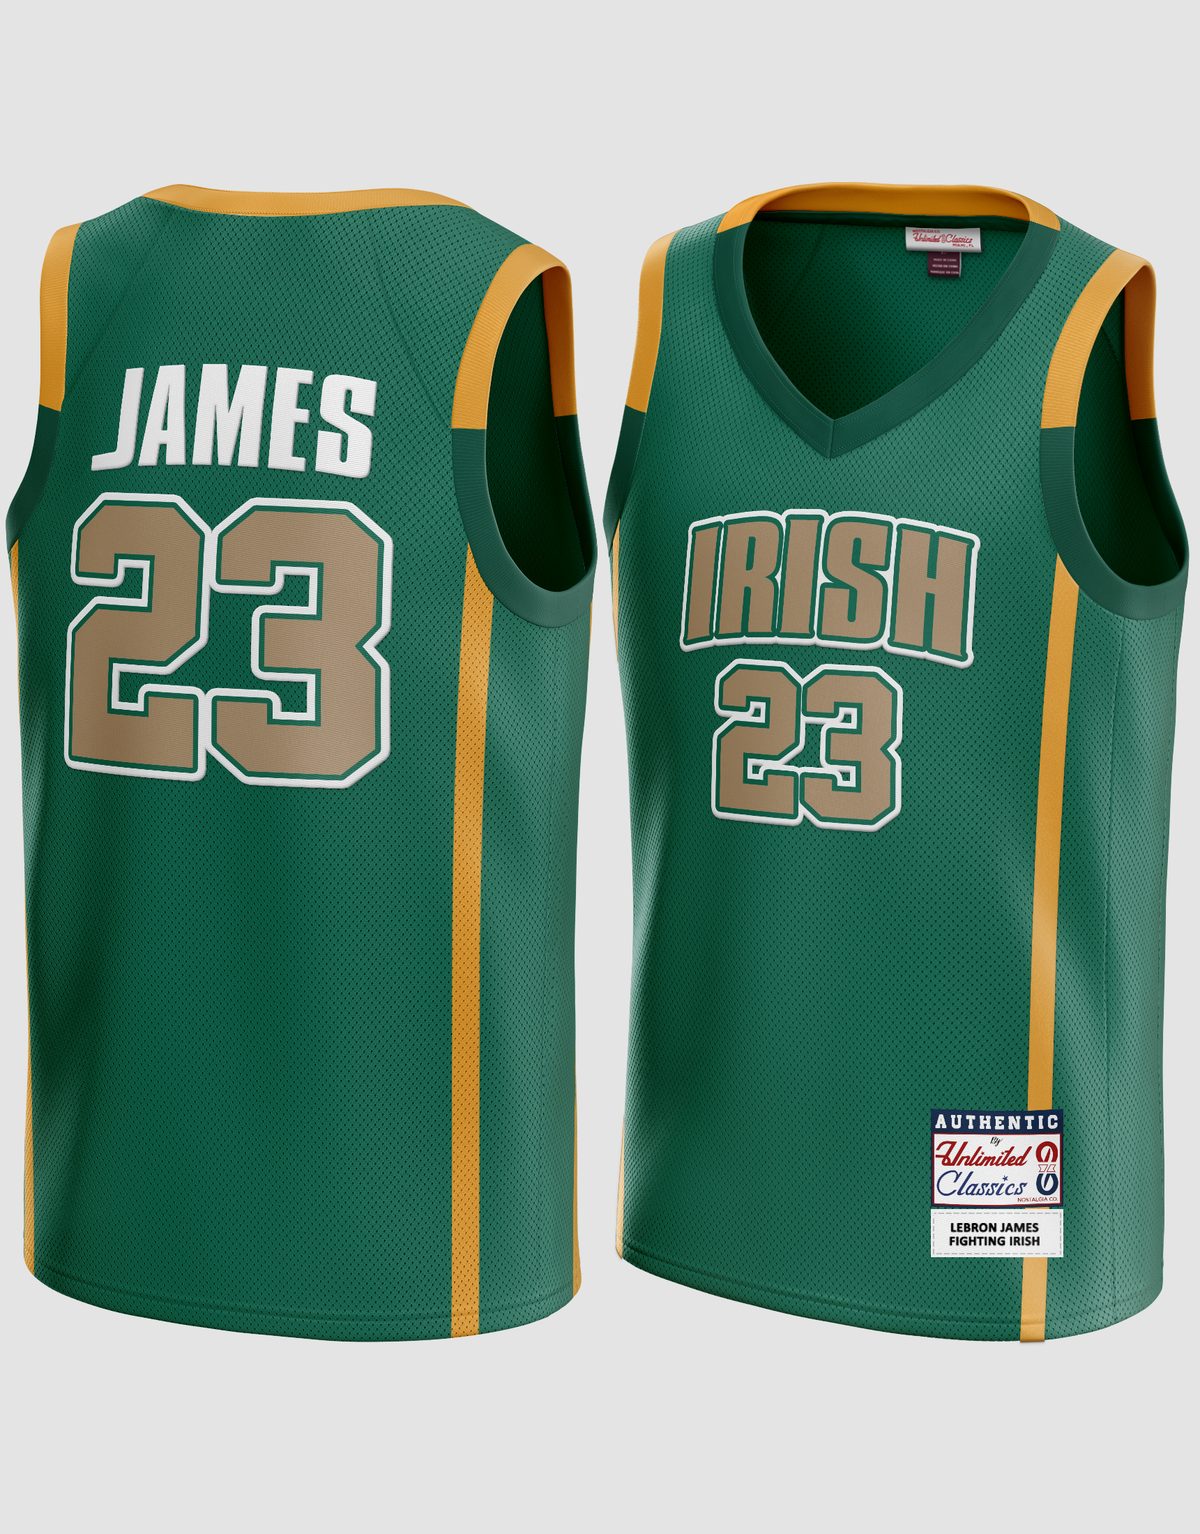 High on hope, Lakers fans cash in for new LeBron James jerseys